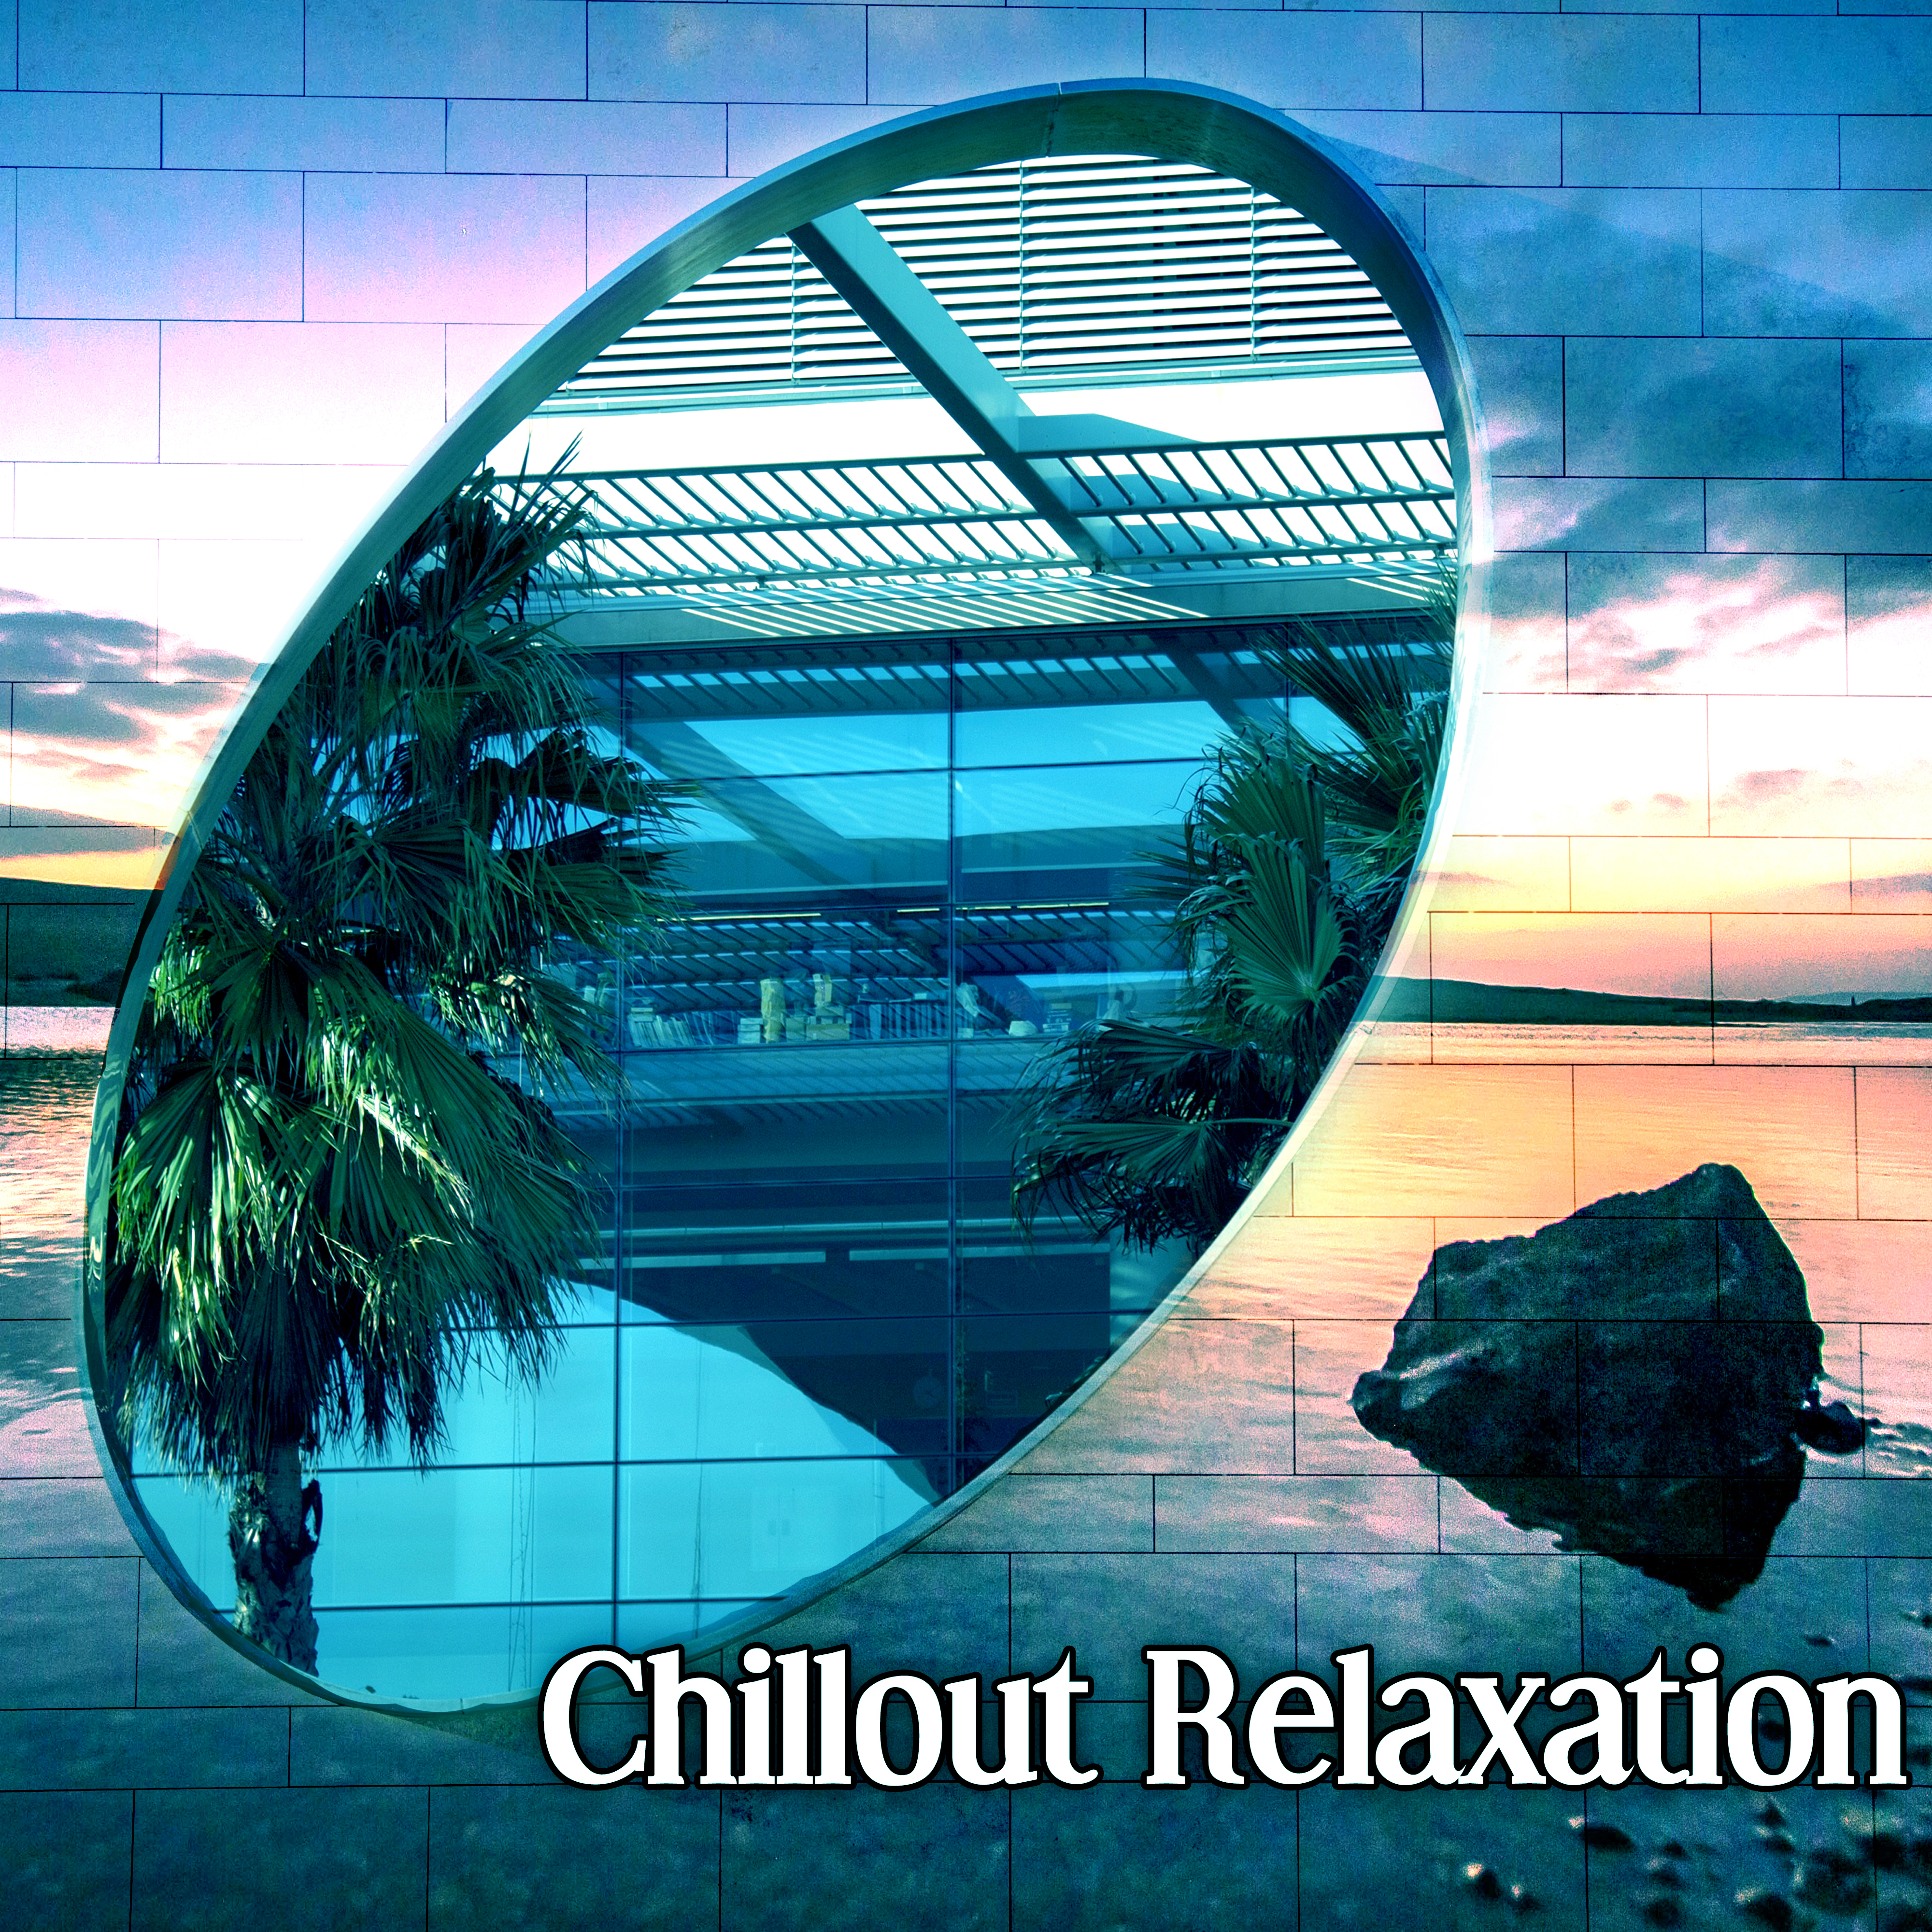 Chillout Relaxation – Chillout Music, Peaceful Sounds, Relax & Chill, Yourself, Calm Music